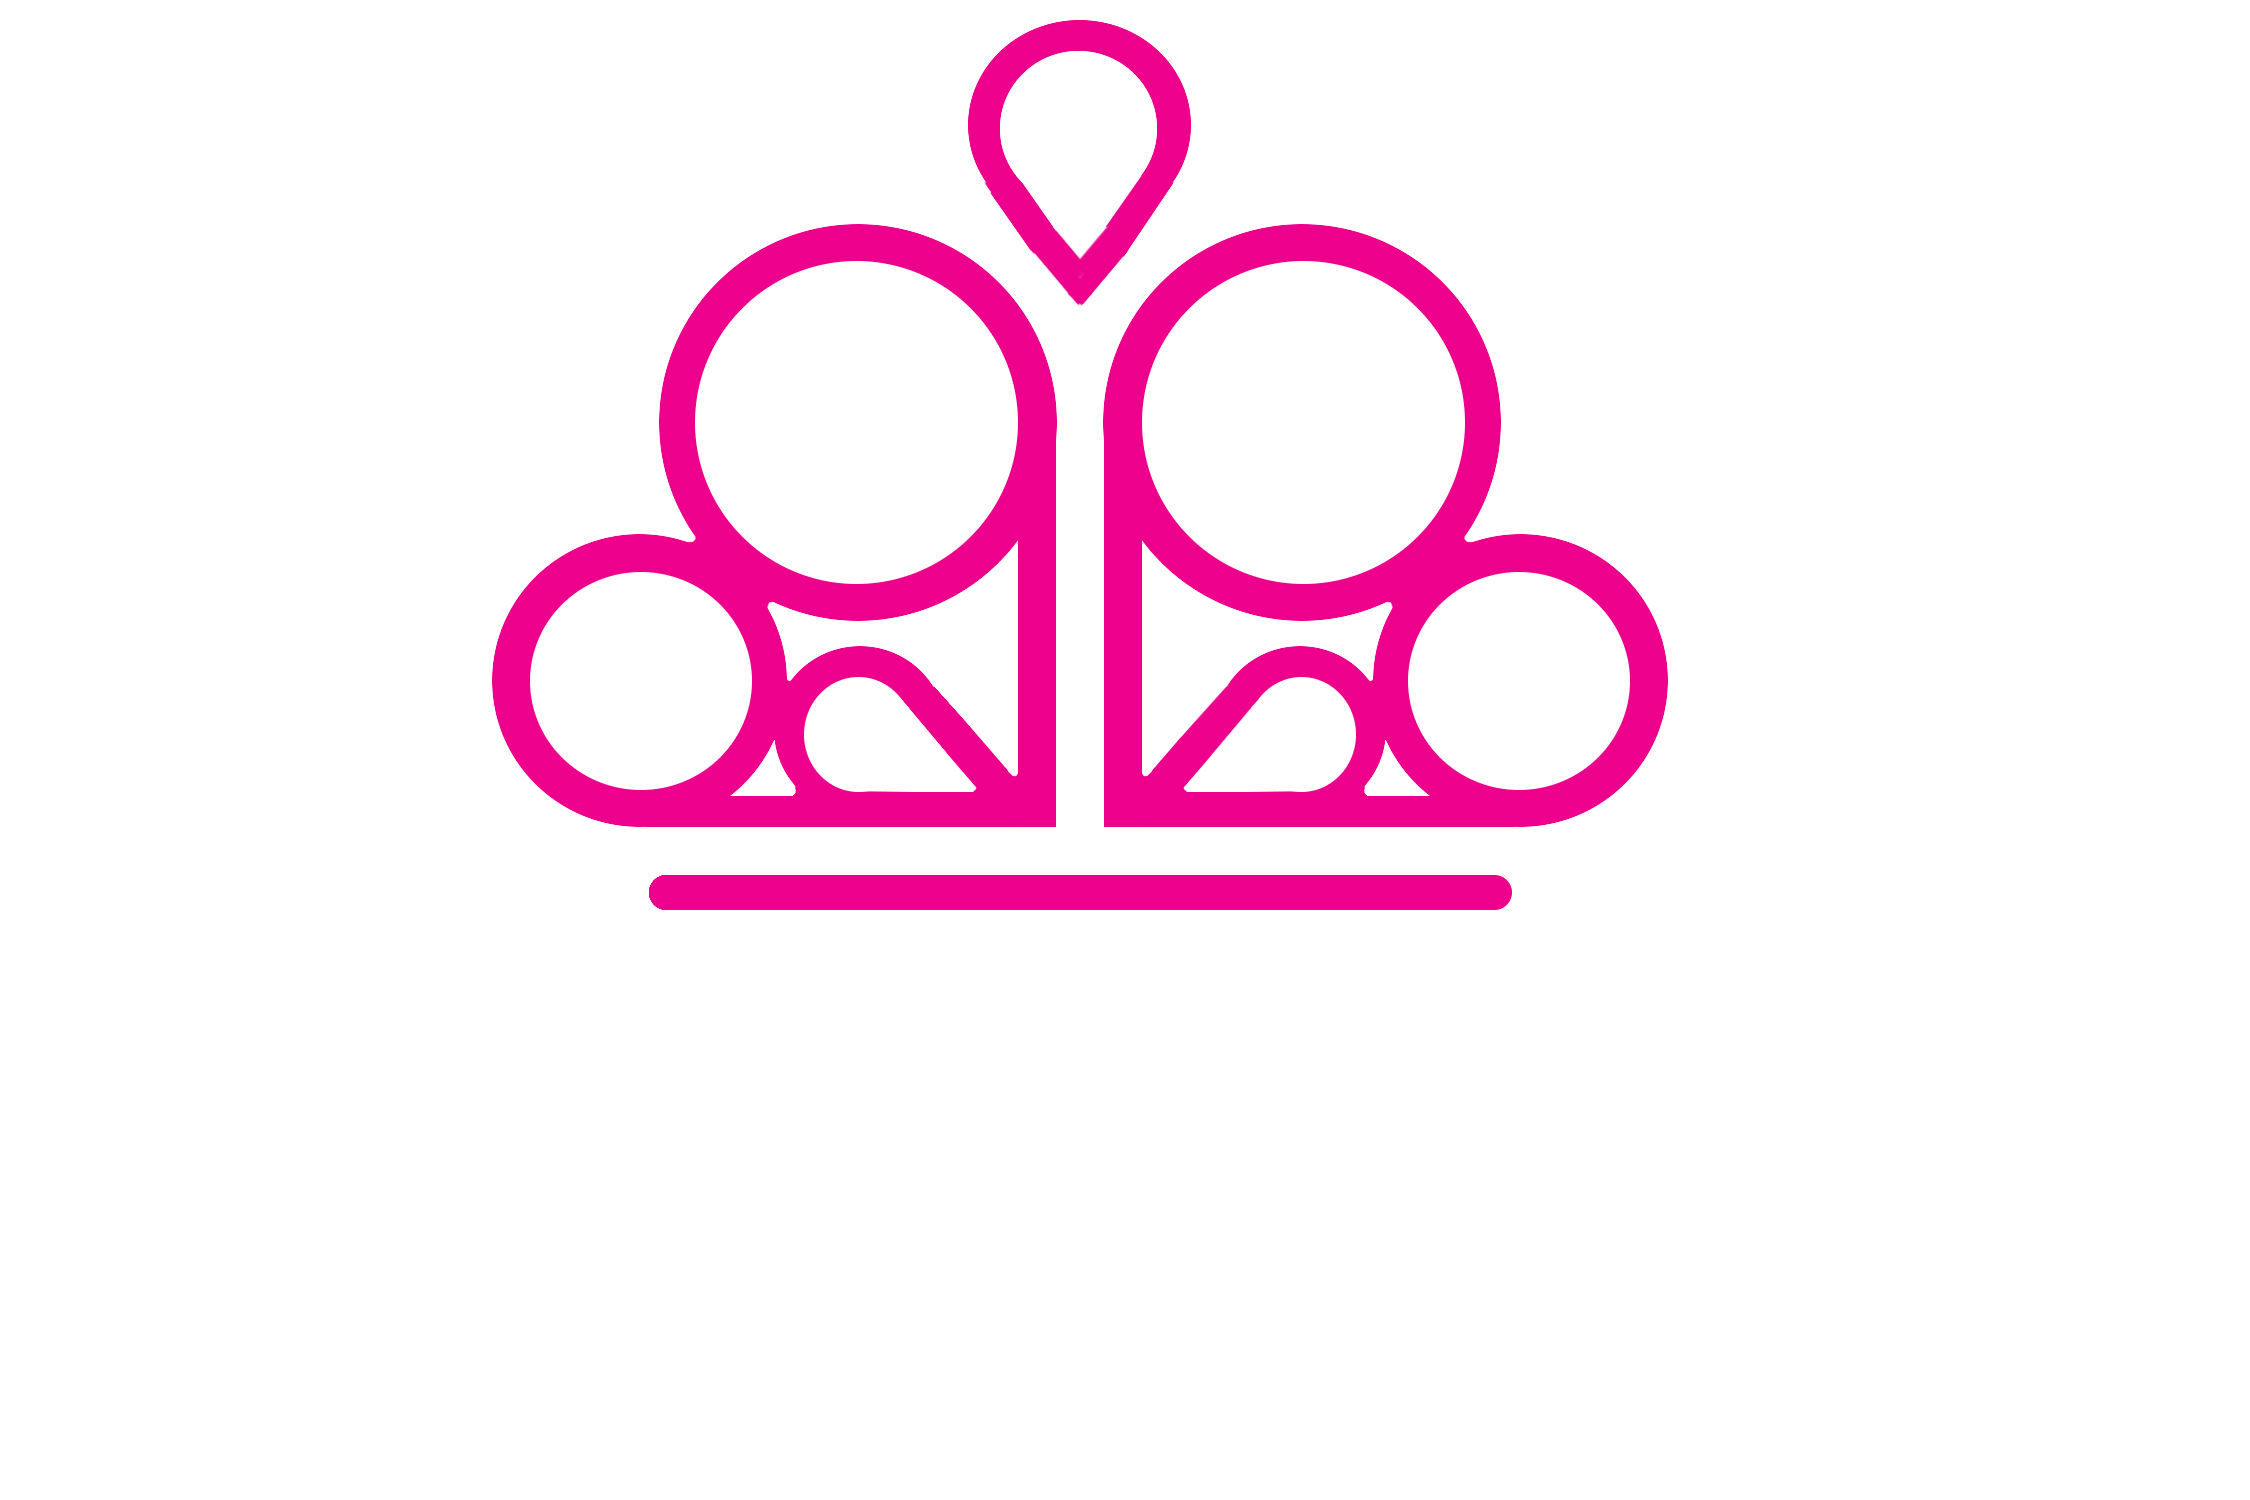 Paparazzi Logo - Paparazzi Accessories logo background with white letters